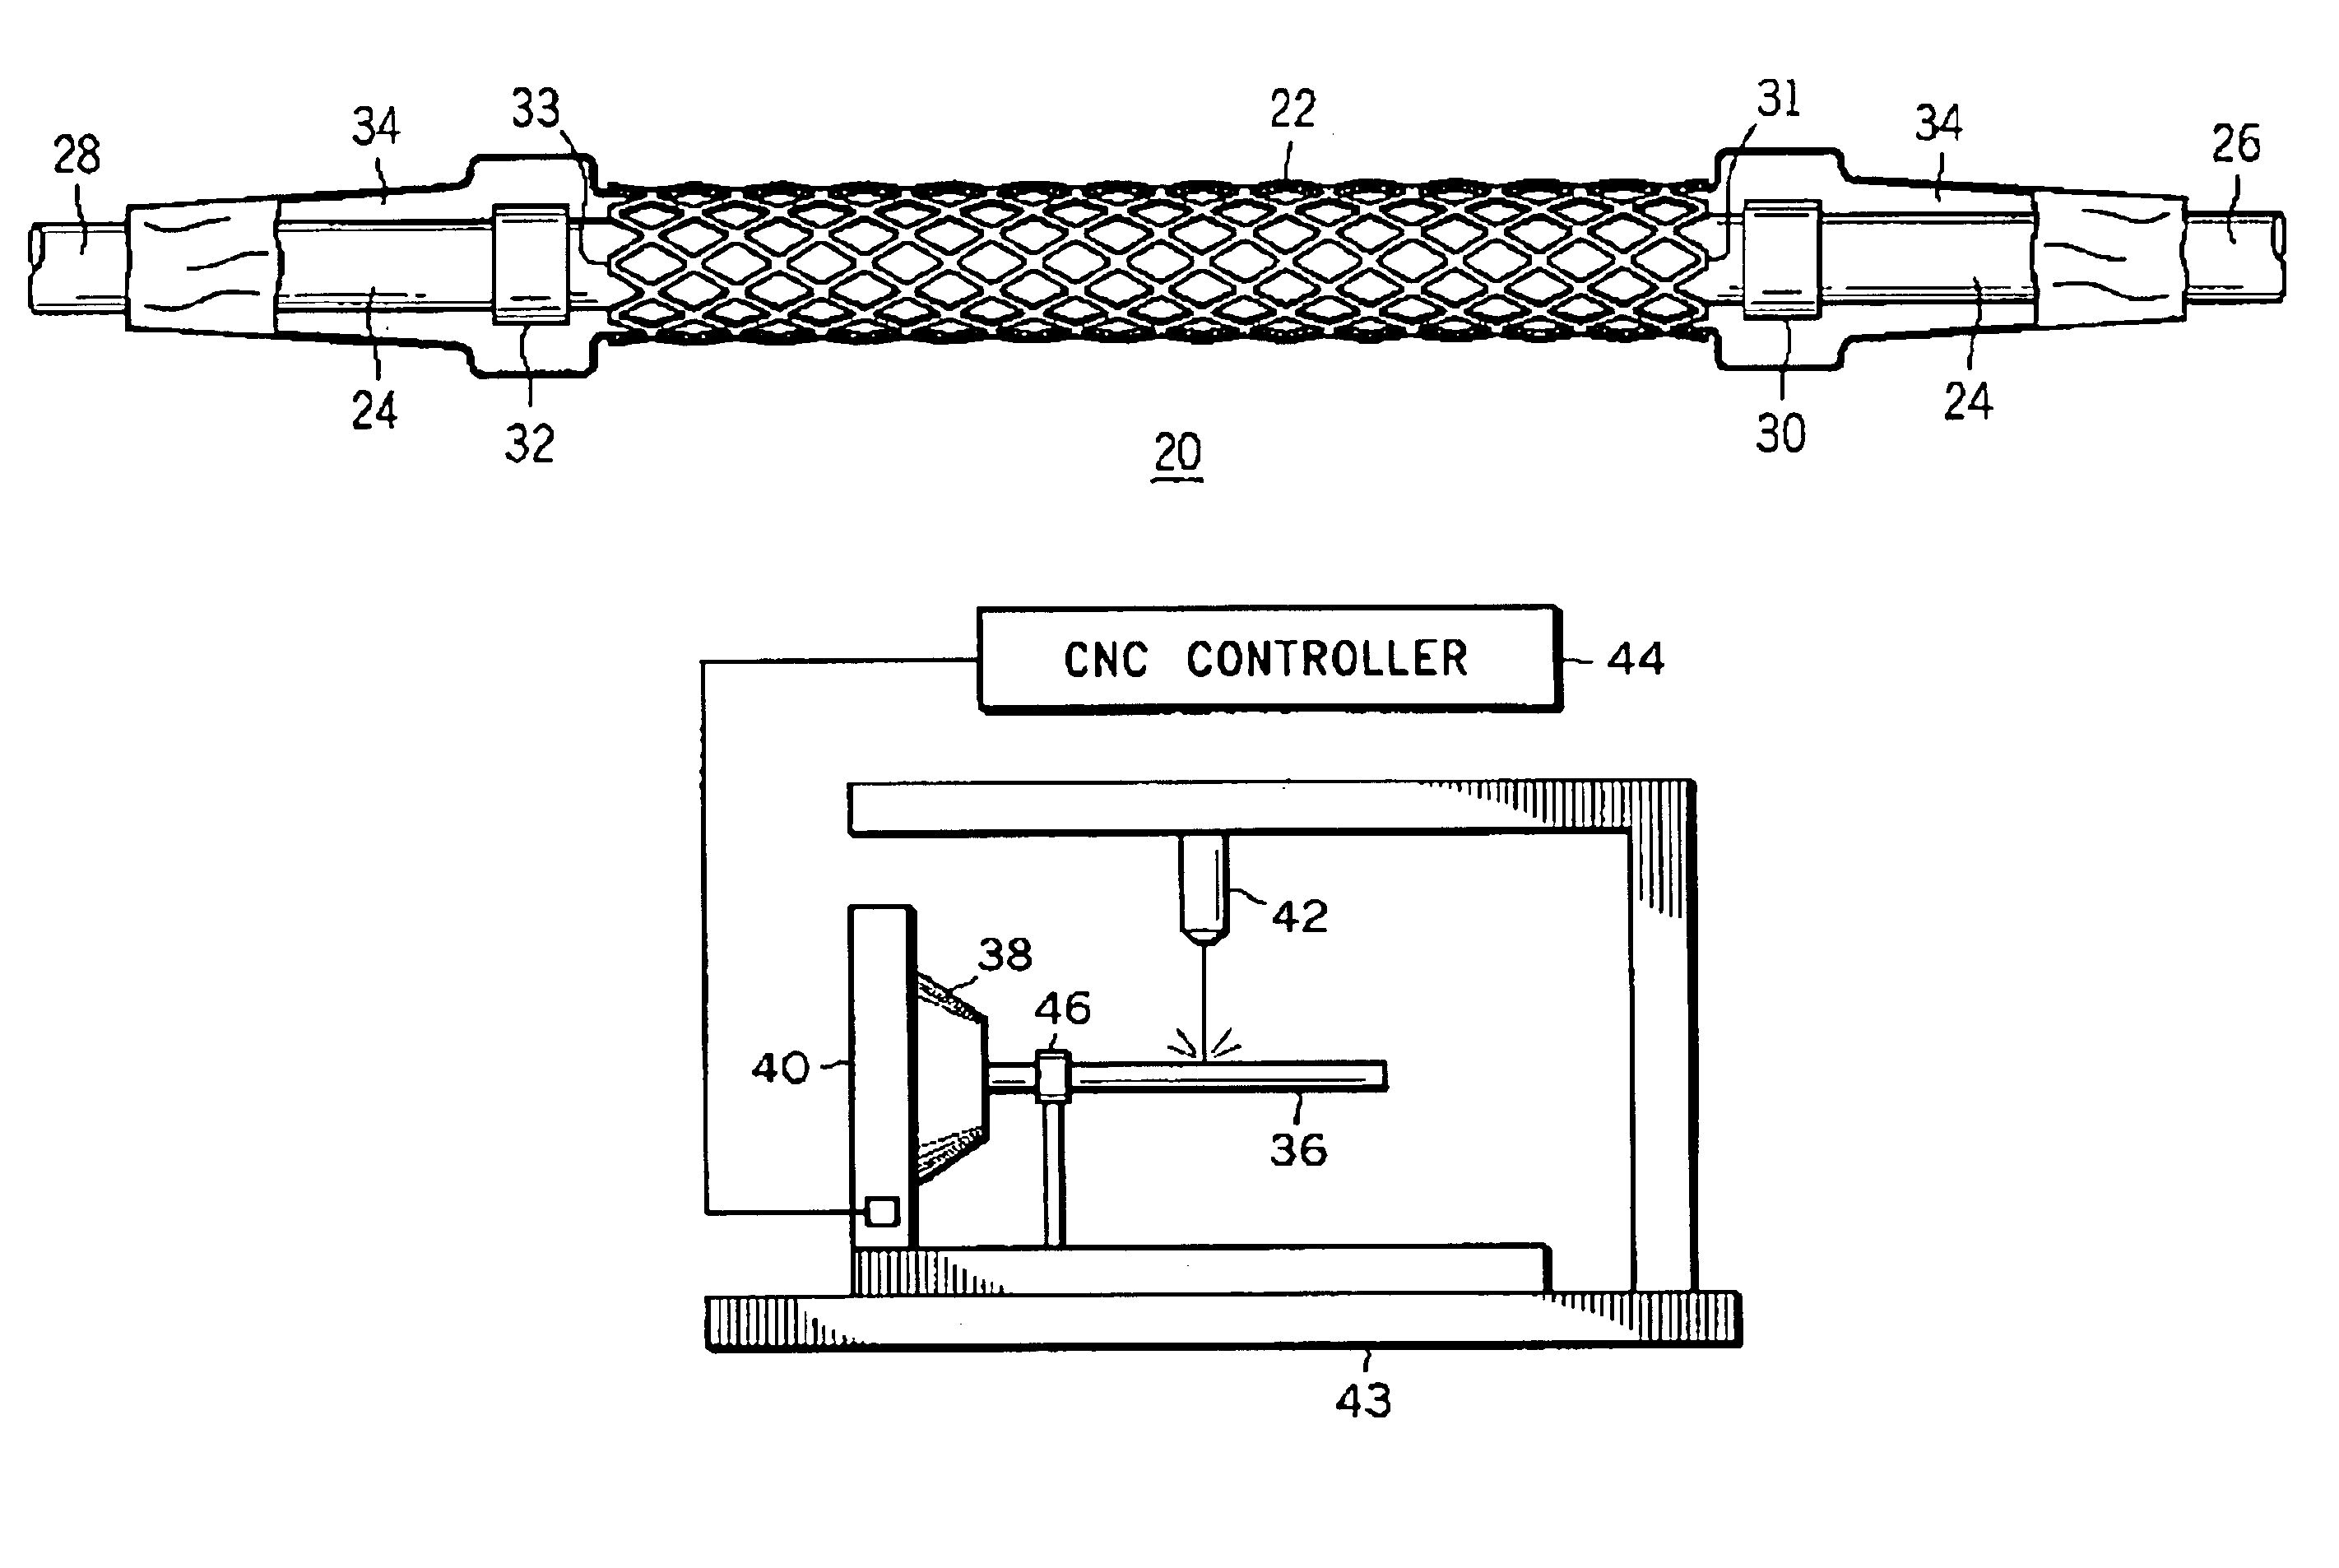 Method for manufacturing an endovascular support device